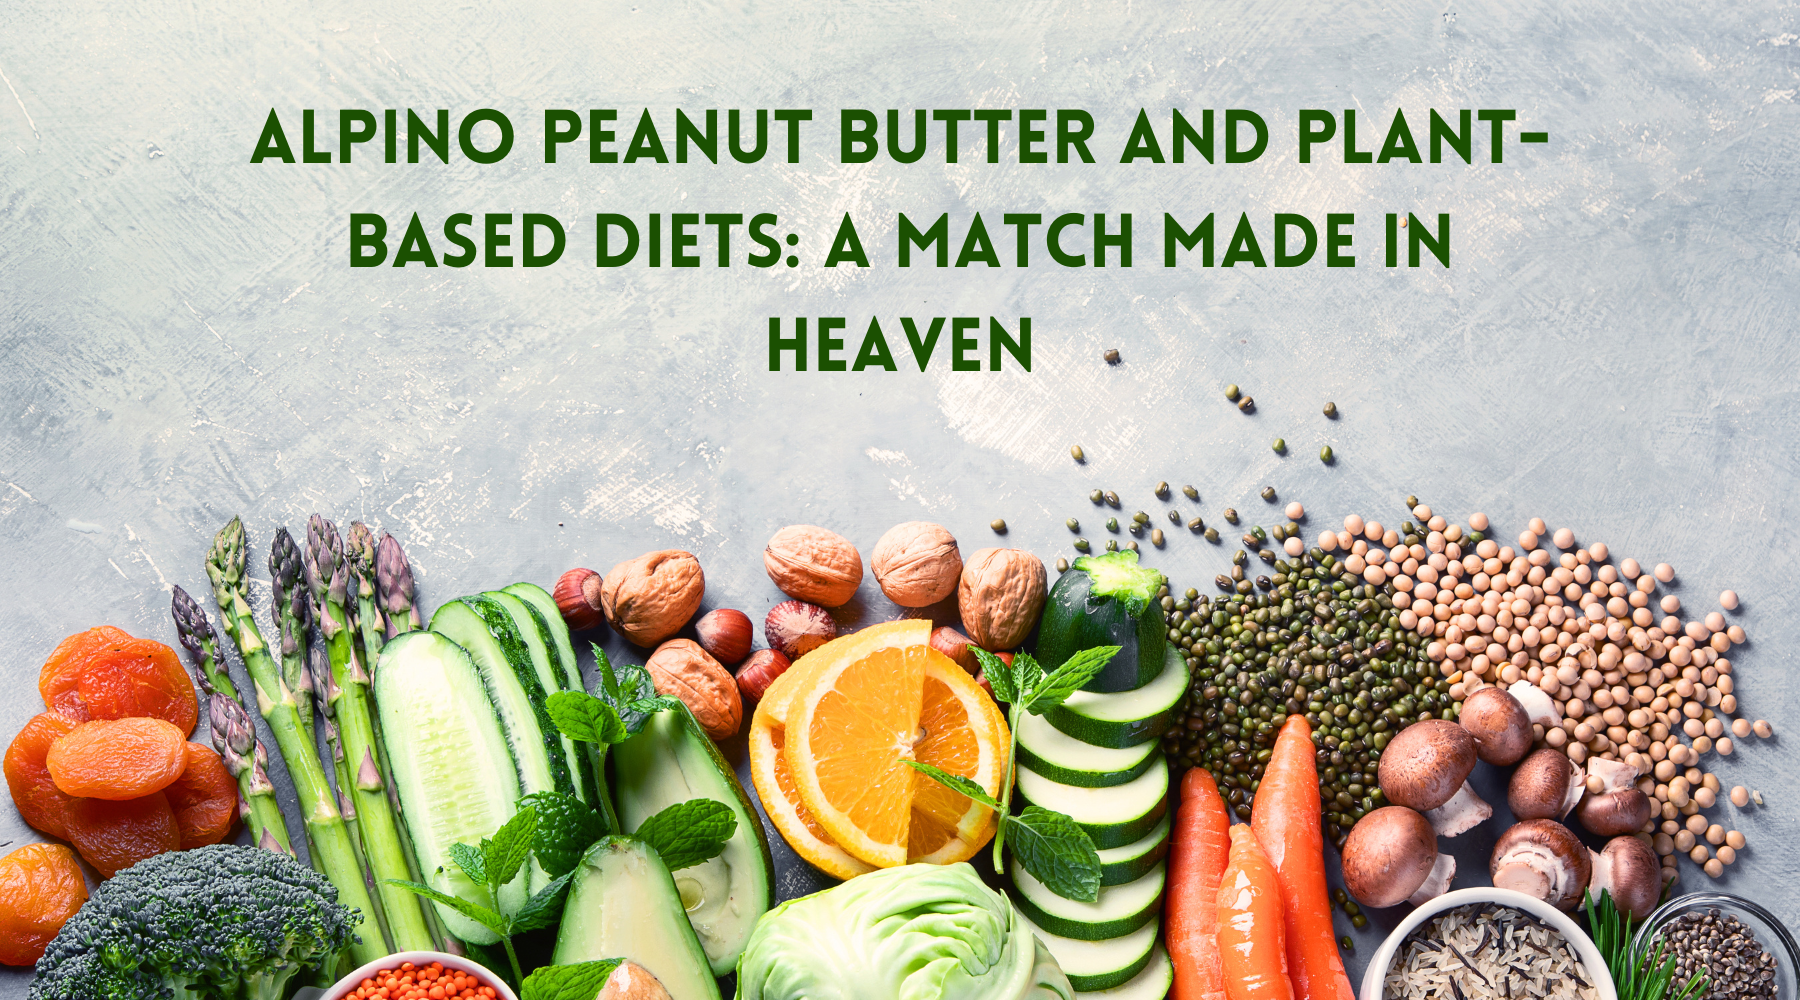 Alpino Peanut Butter and Plant-Based Diets: A Match Made in Heaven